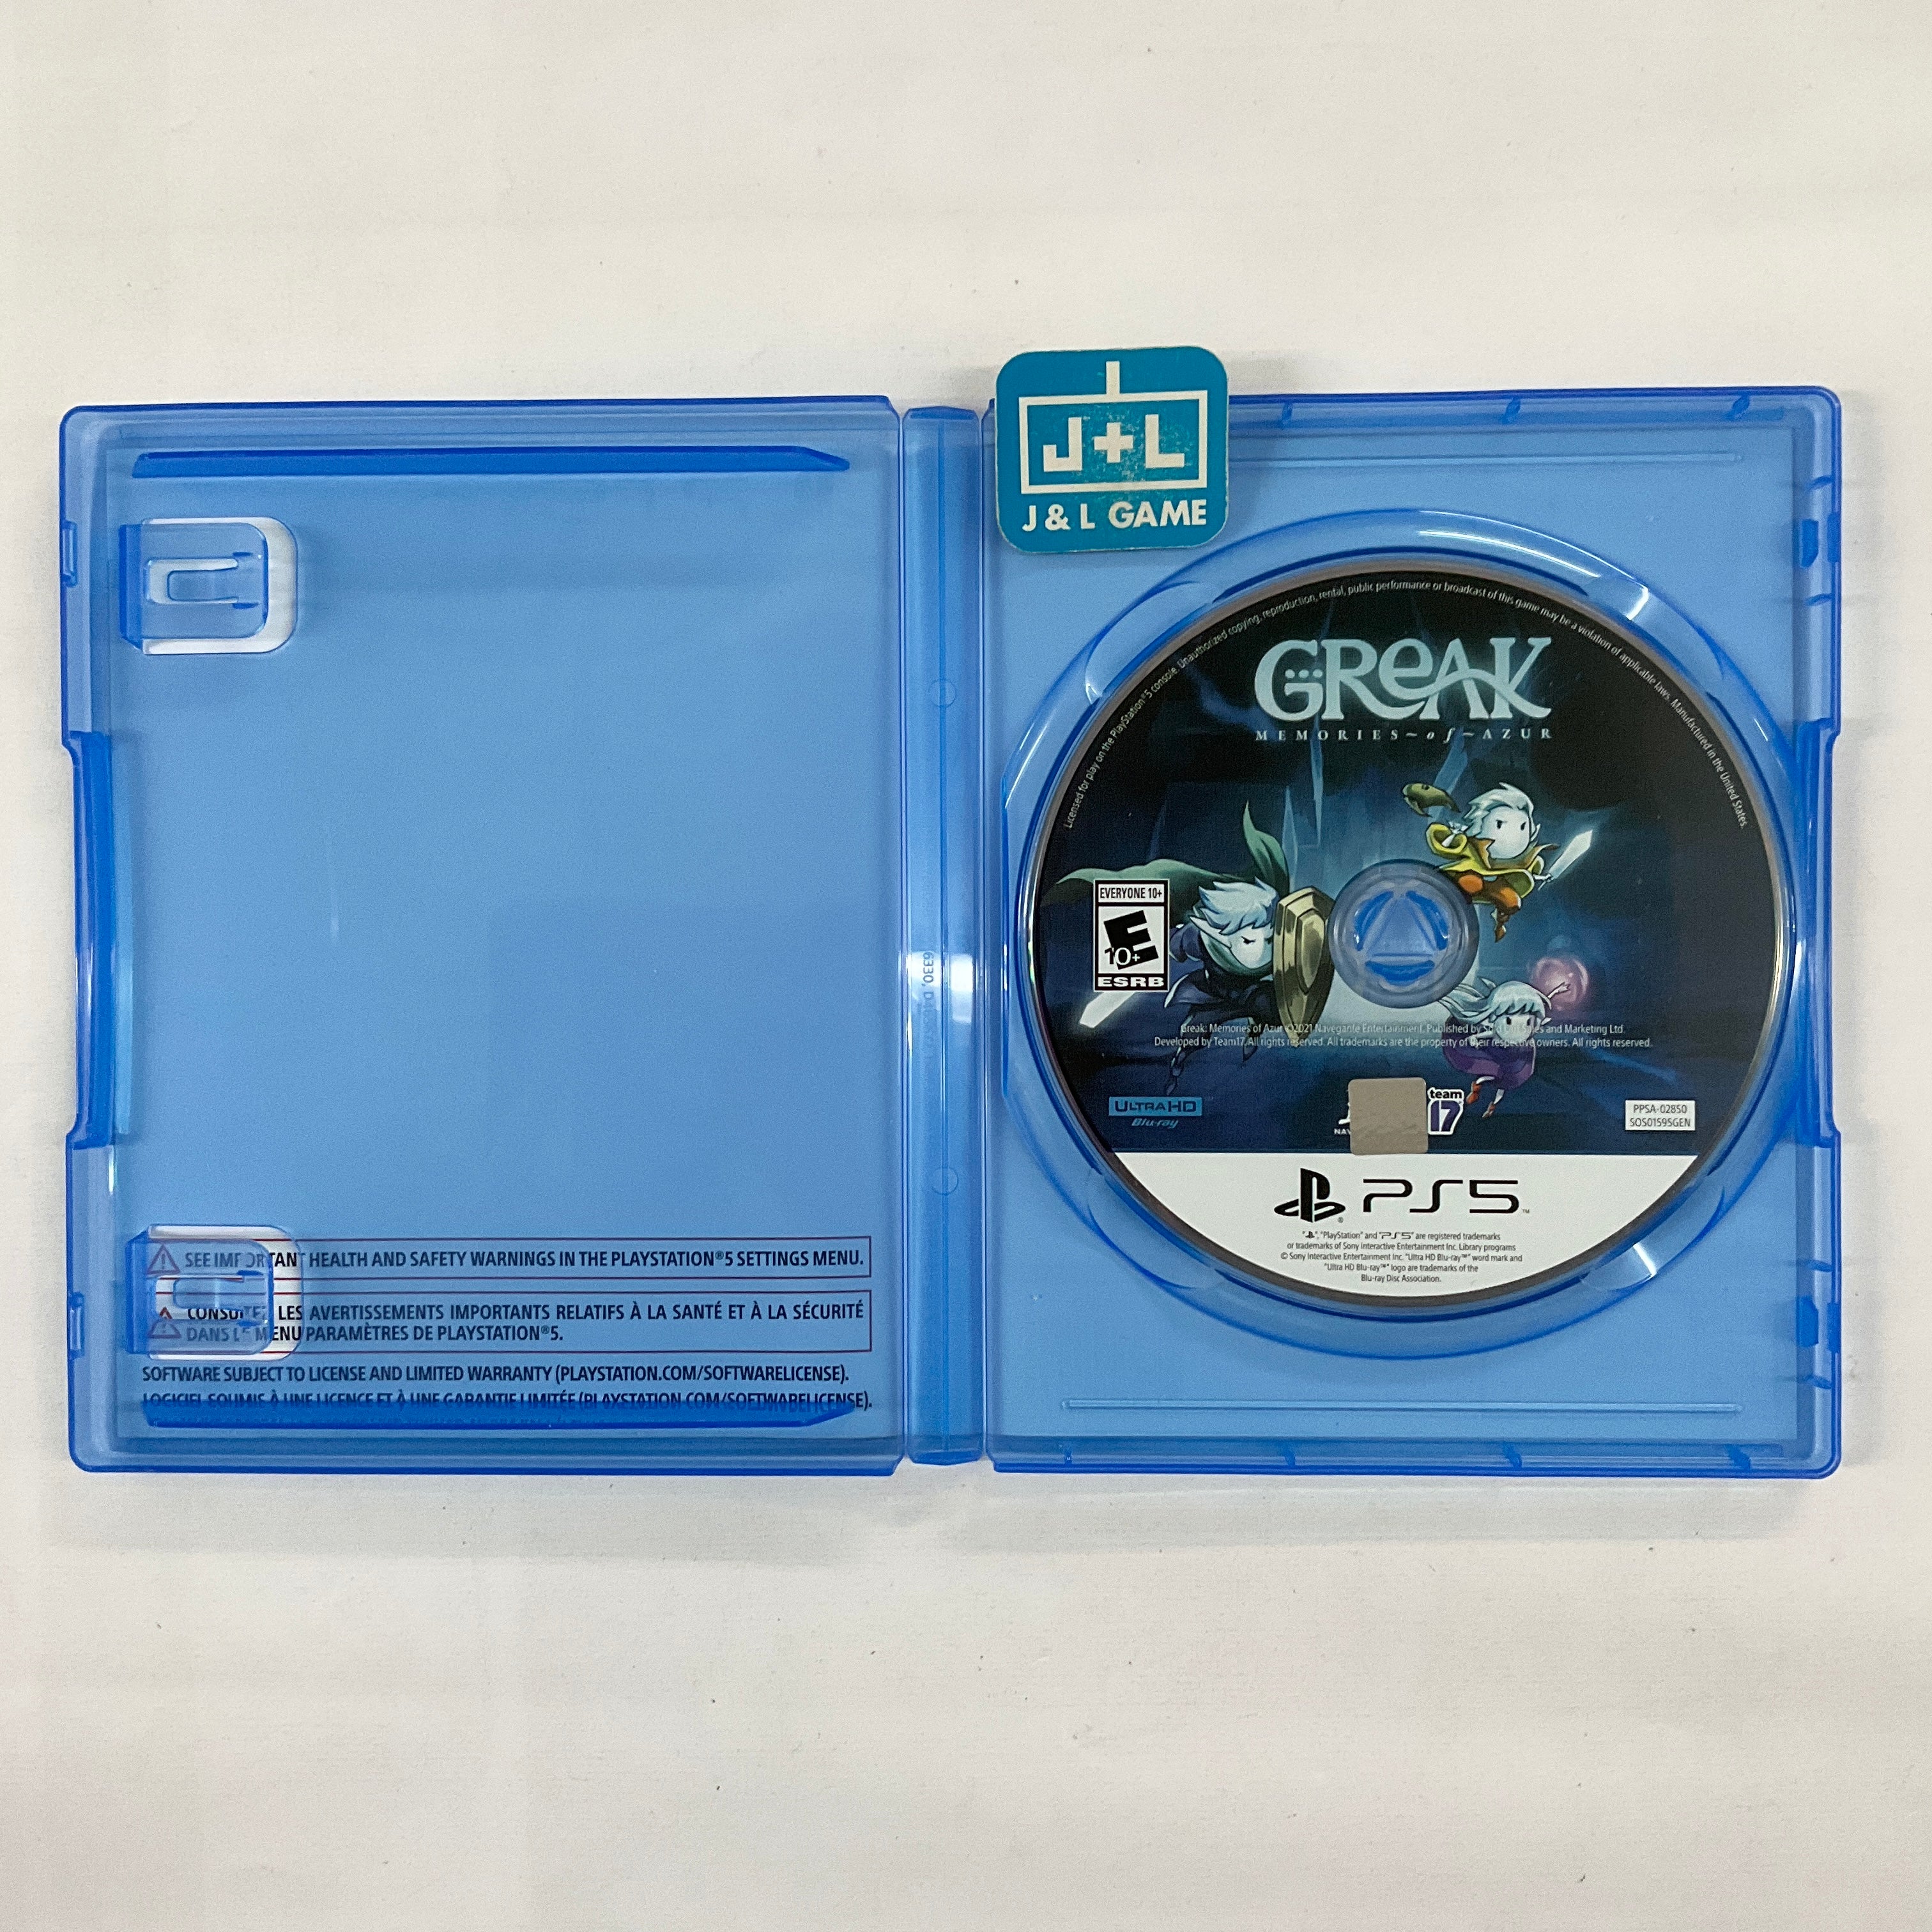 Greak: Memories of Azur - (PS5) PlayStation 5 [Pre-Owned] Video Games Sold Out   